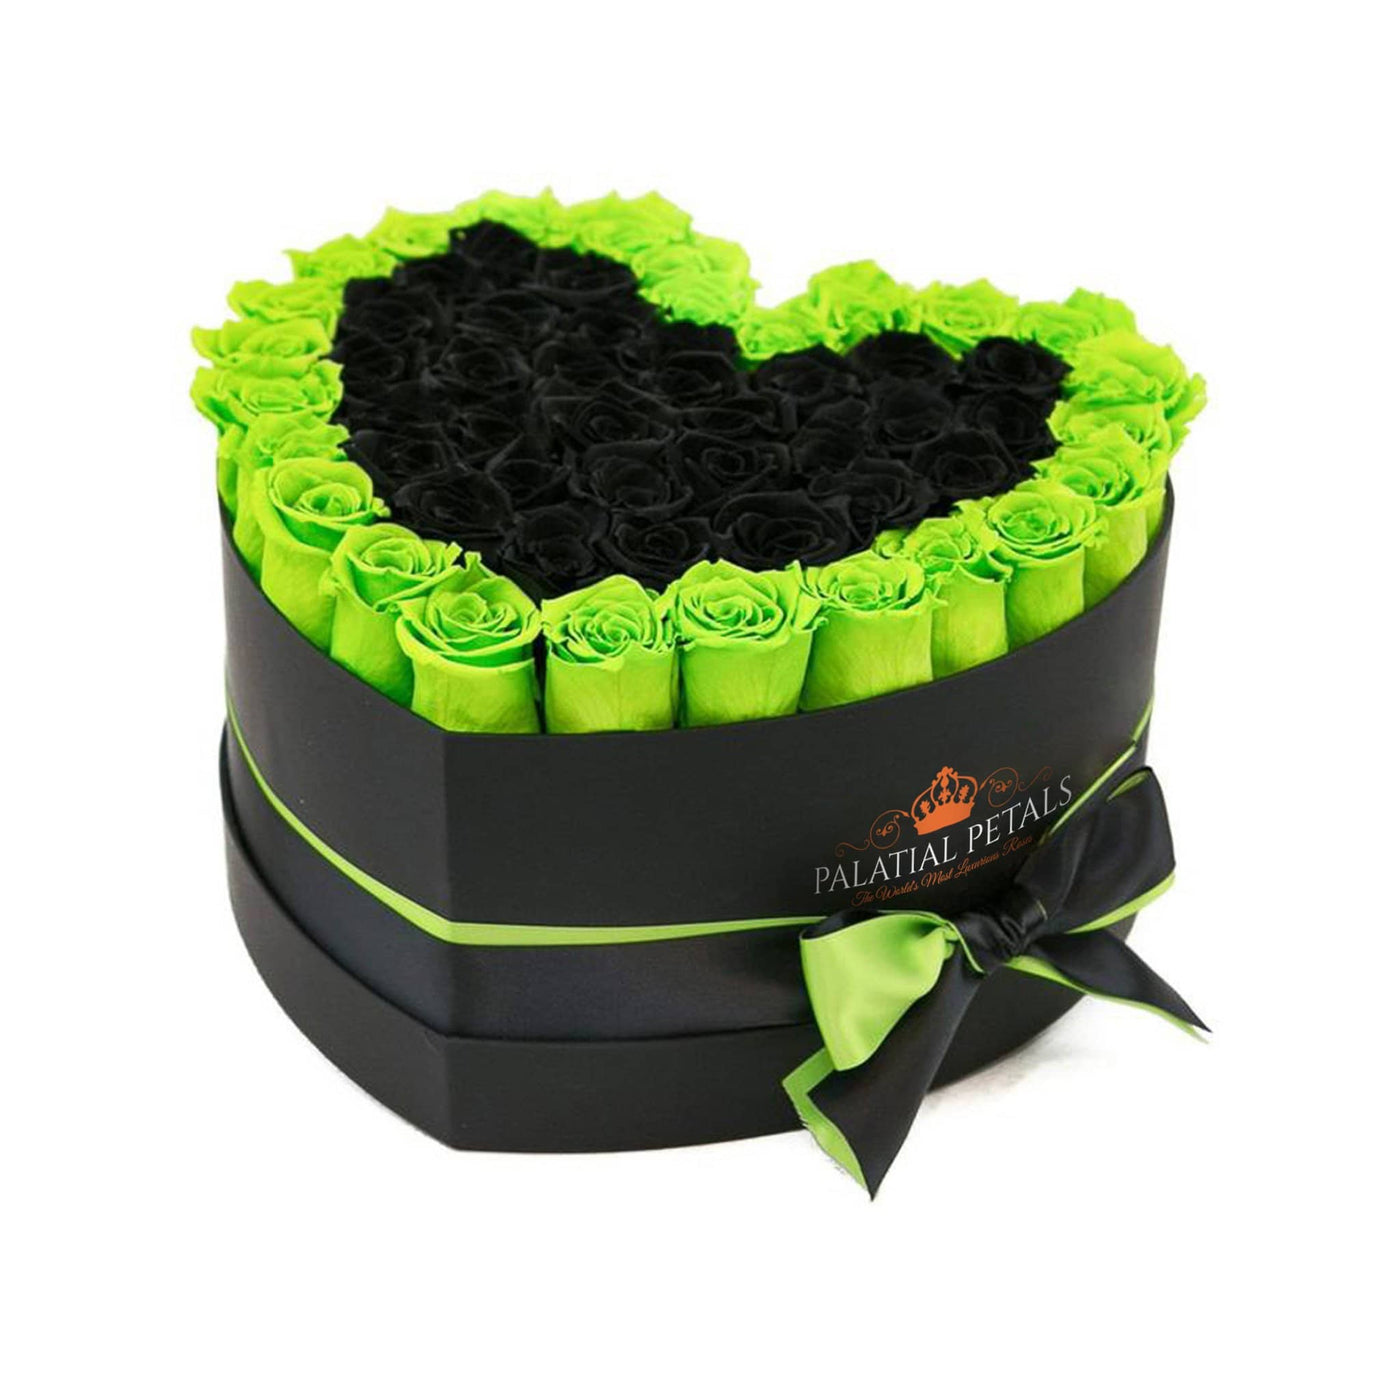 Green & Black Roses That Last A Year - Love Heart Rose Box